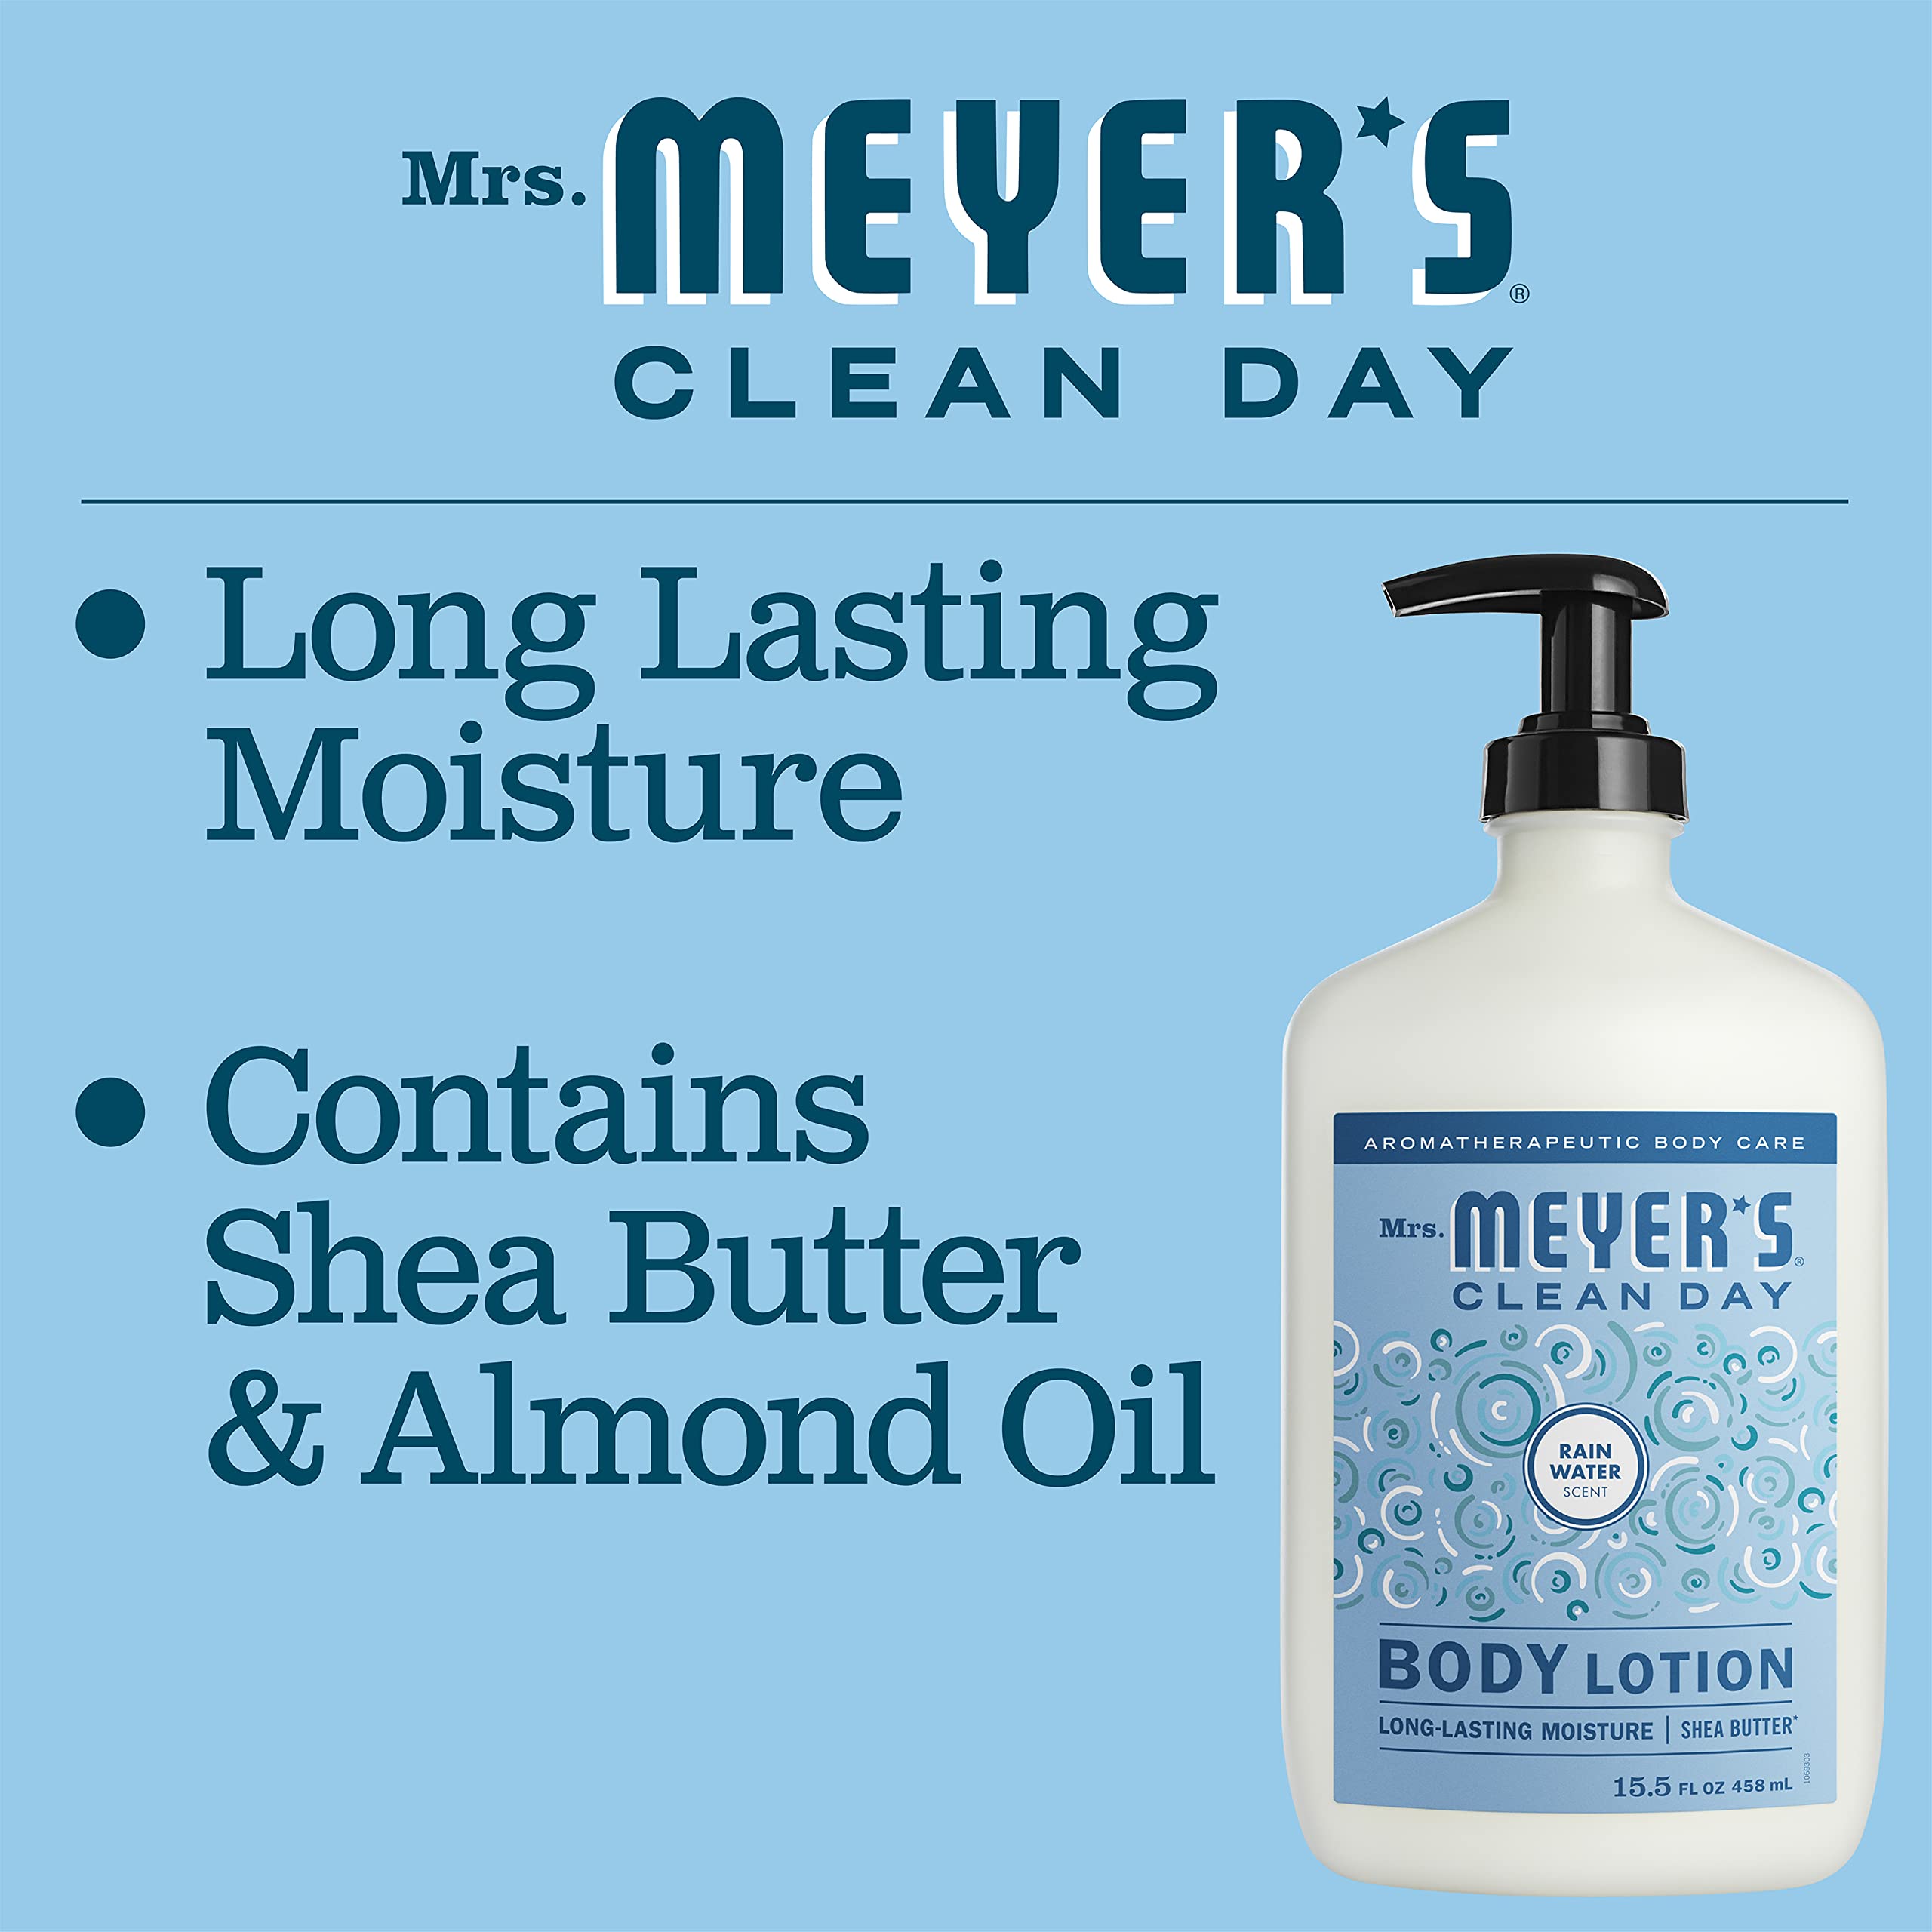 Mrs. Meyer's Body Lotion for Dry Skin, Non-Greasy Moisturizer Made with Essential Oils, Rain Water, 46.5 oz, Pack of 3